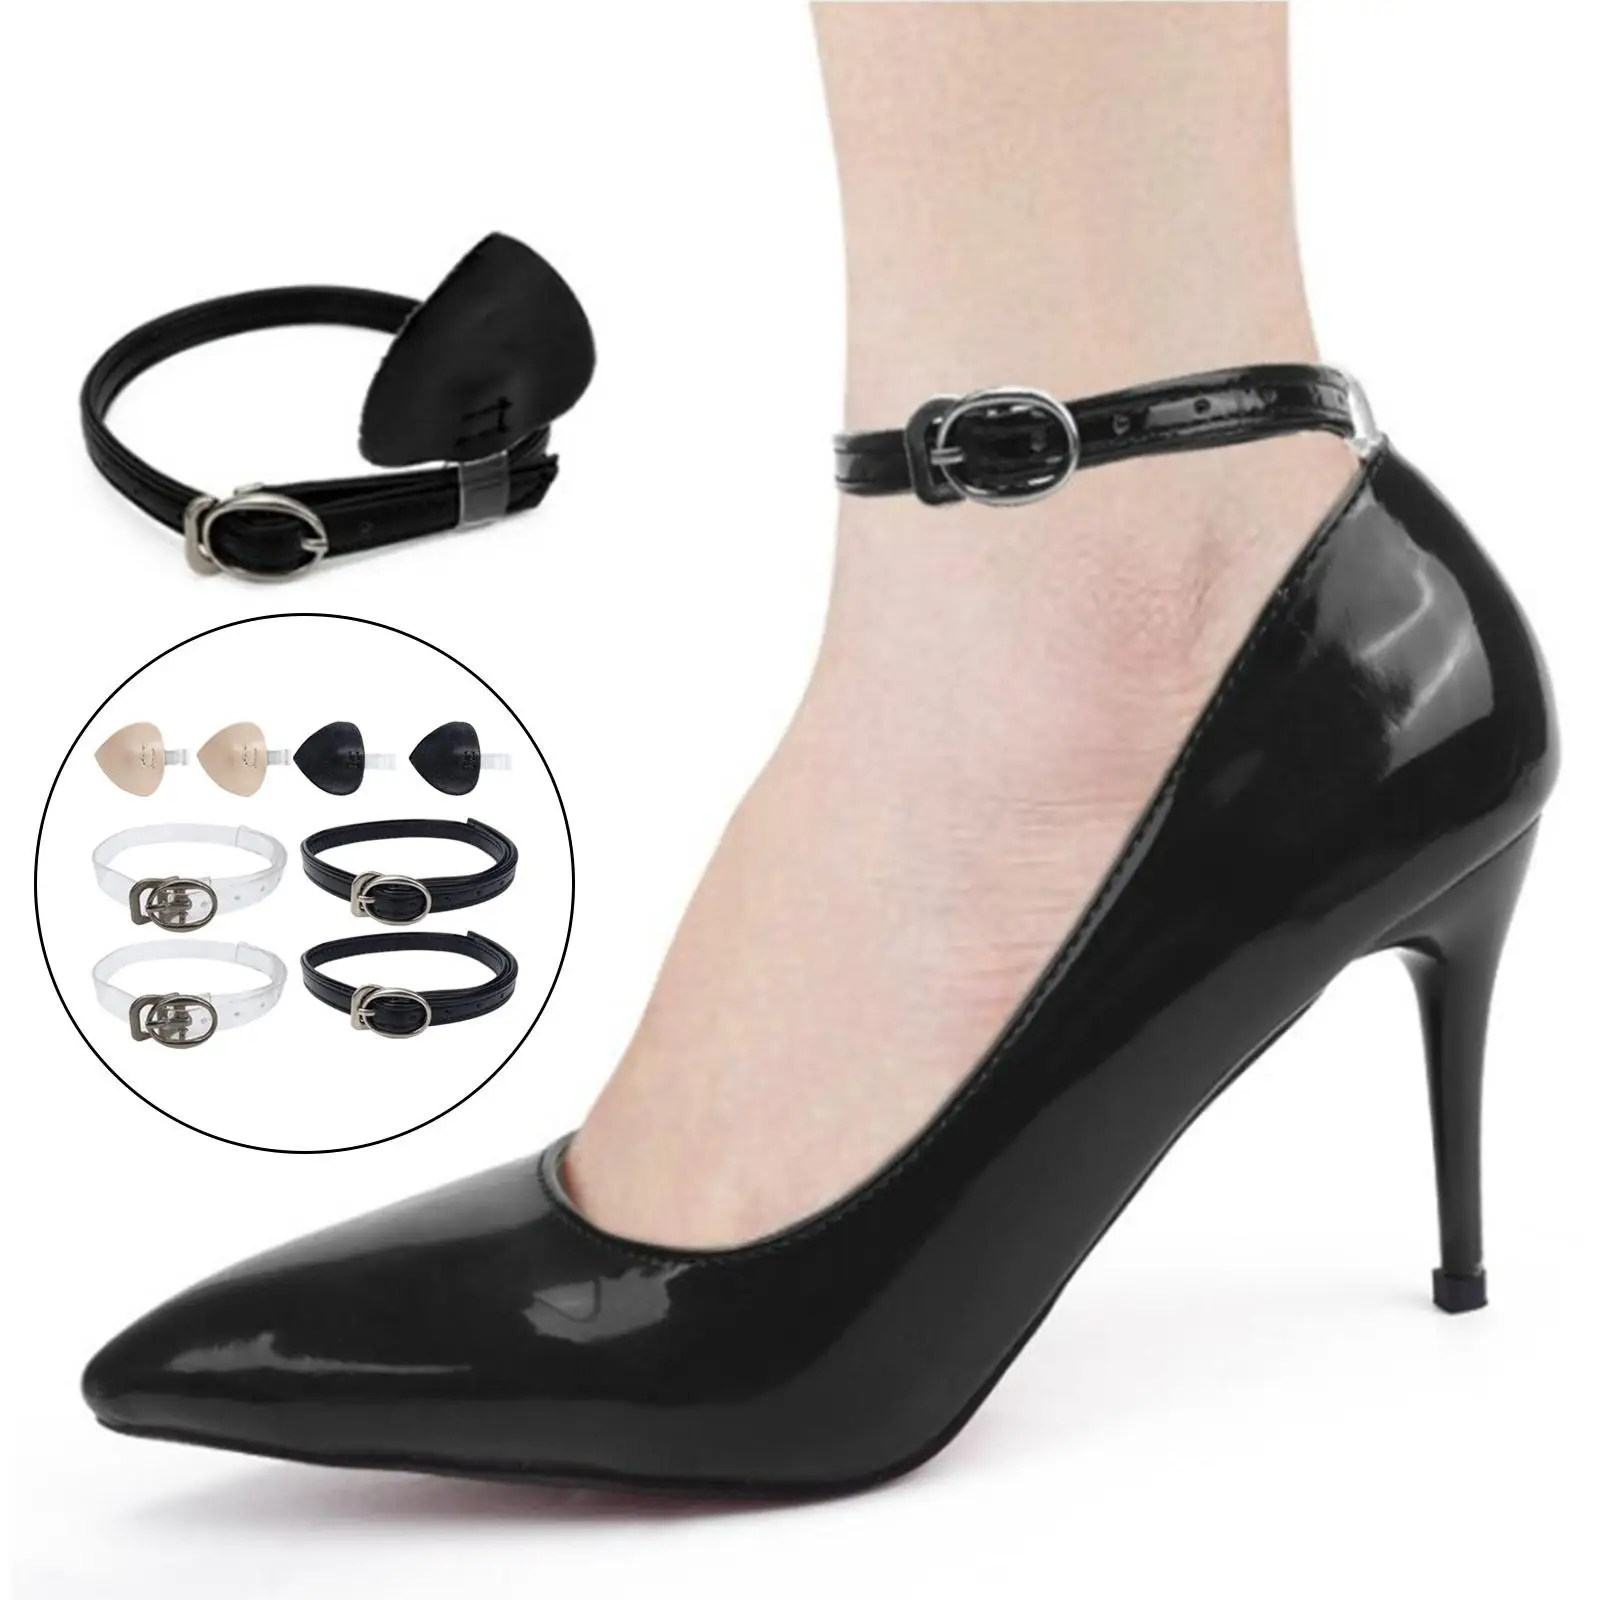 2x Detachable High Heels Anti-Slip Shoe Straps Self-Adhesive Heel Cushion Inserts Shoe Belt Accessories Ankle Tie Band for Party